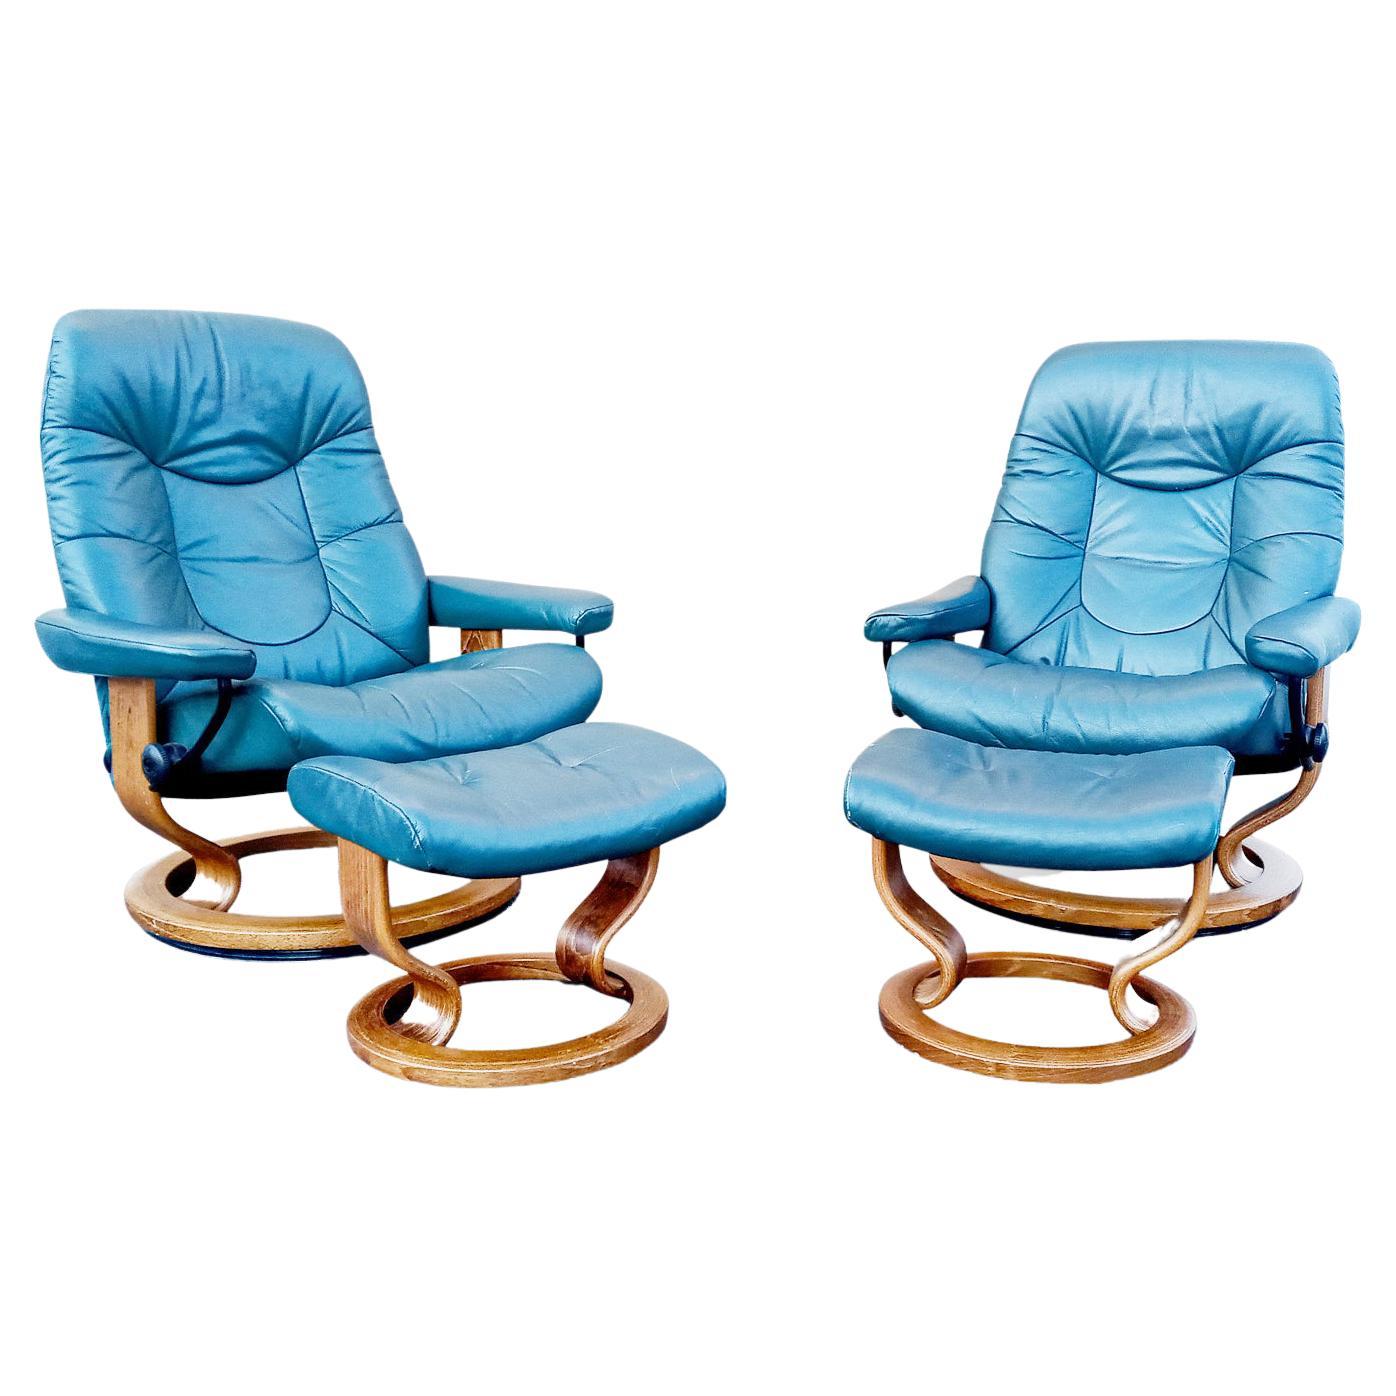 teal recliners